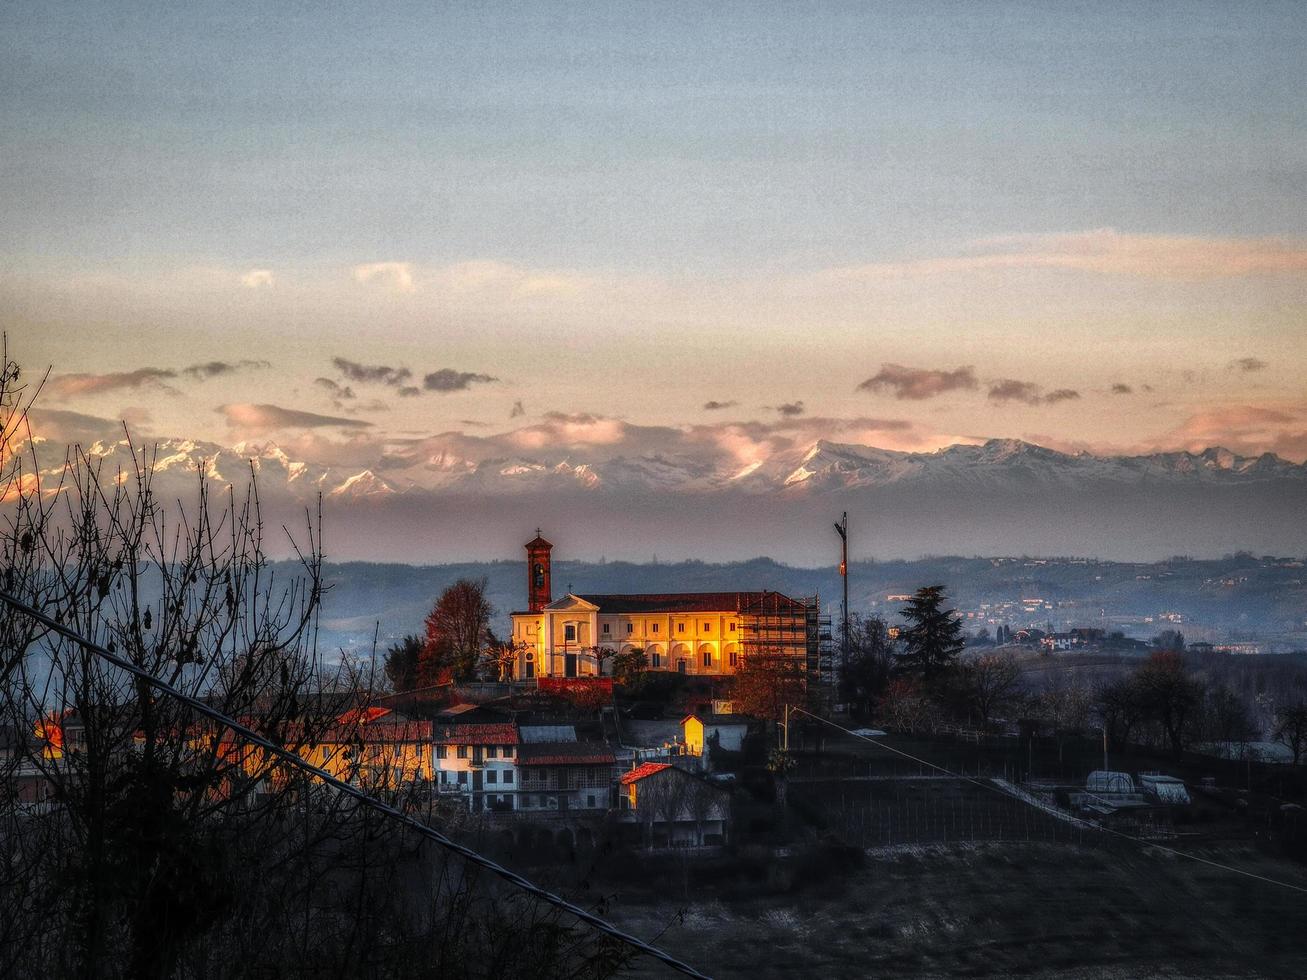 the territory of the roero, near Asti. And behind the Monviso mountain range after a snowfall photo